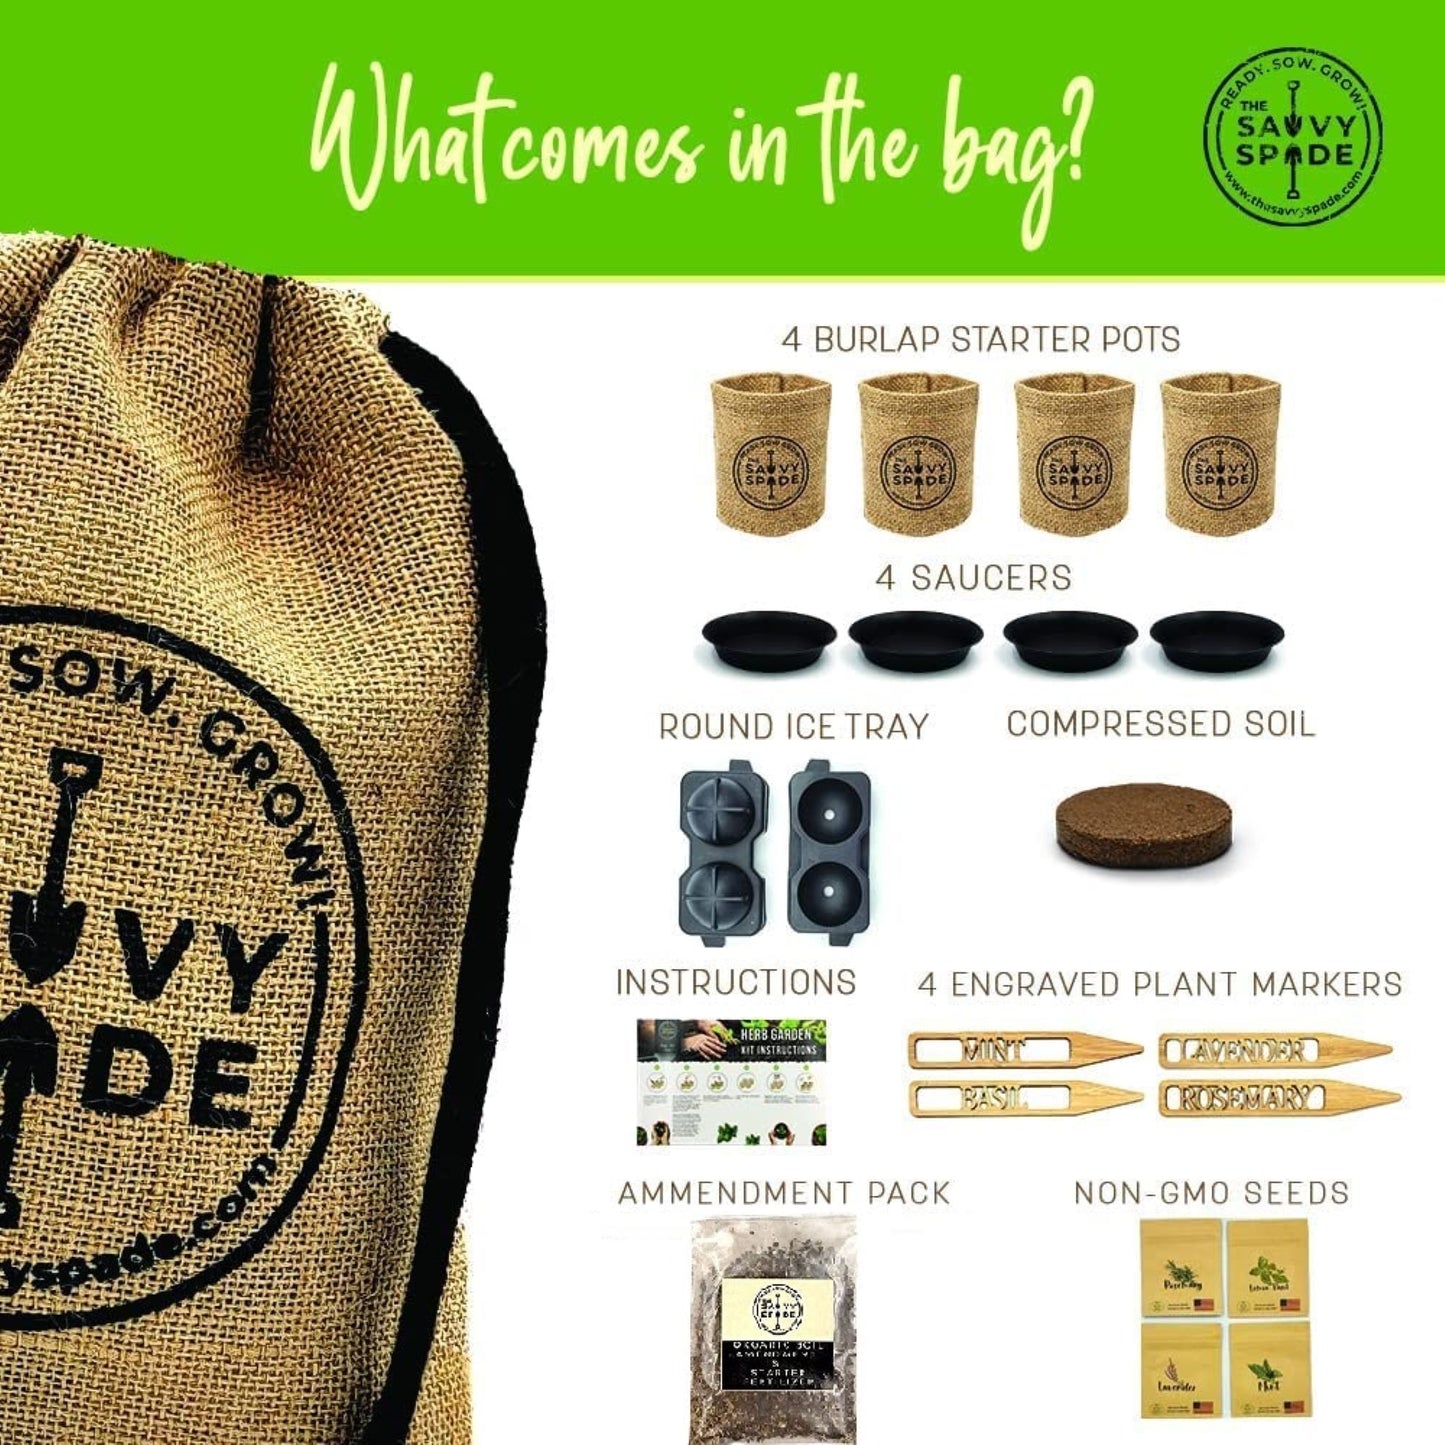 Items included in the kit are 4 burlap starter pots, 4 round black saucers, silicone ice ball maker, compressed soil, 4 laser cut plant markers, organic soil amendment and fertilizer, non-gmo heirloom seeds and step by step instructions